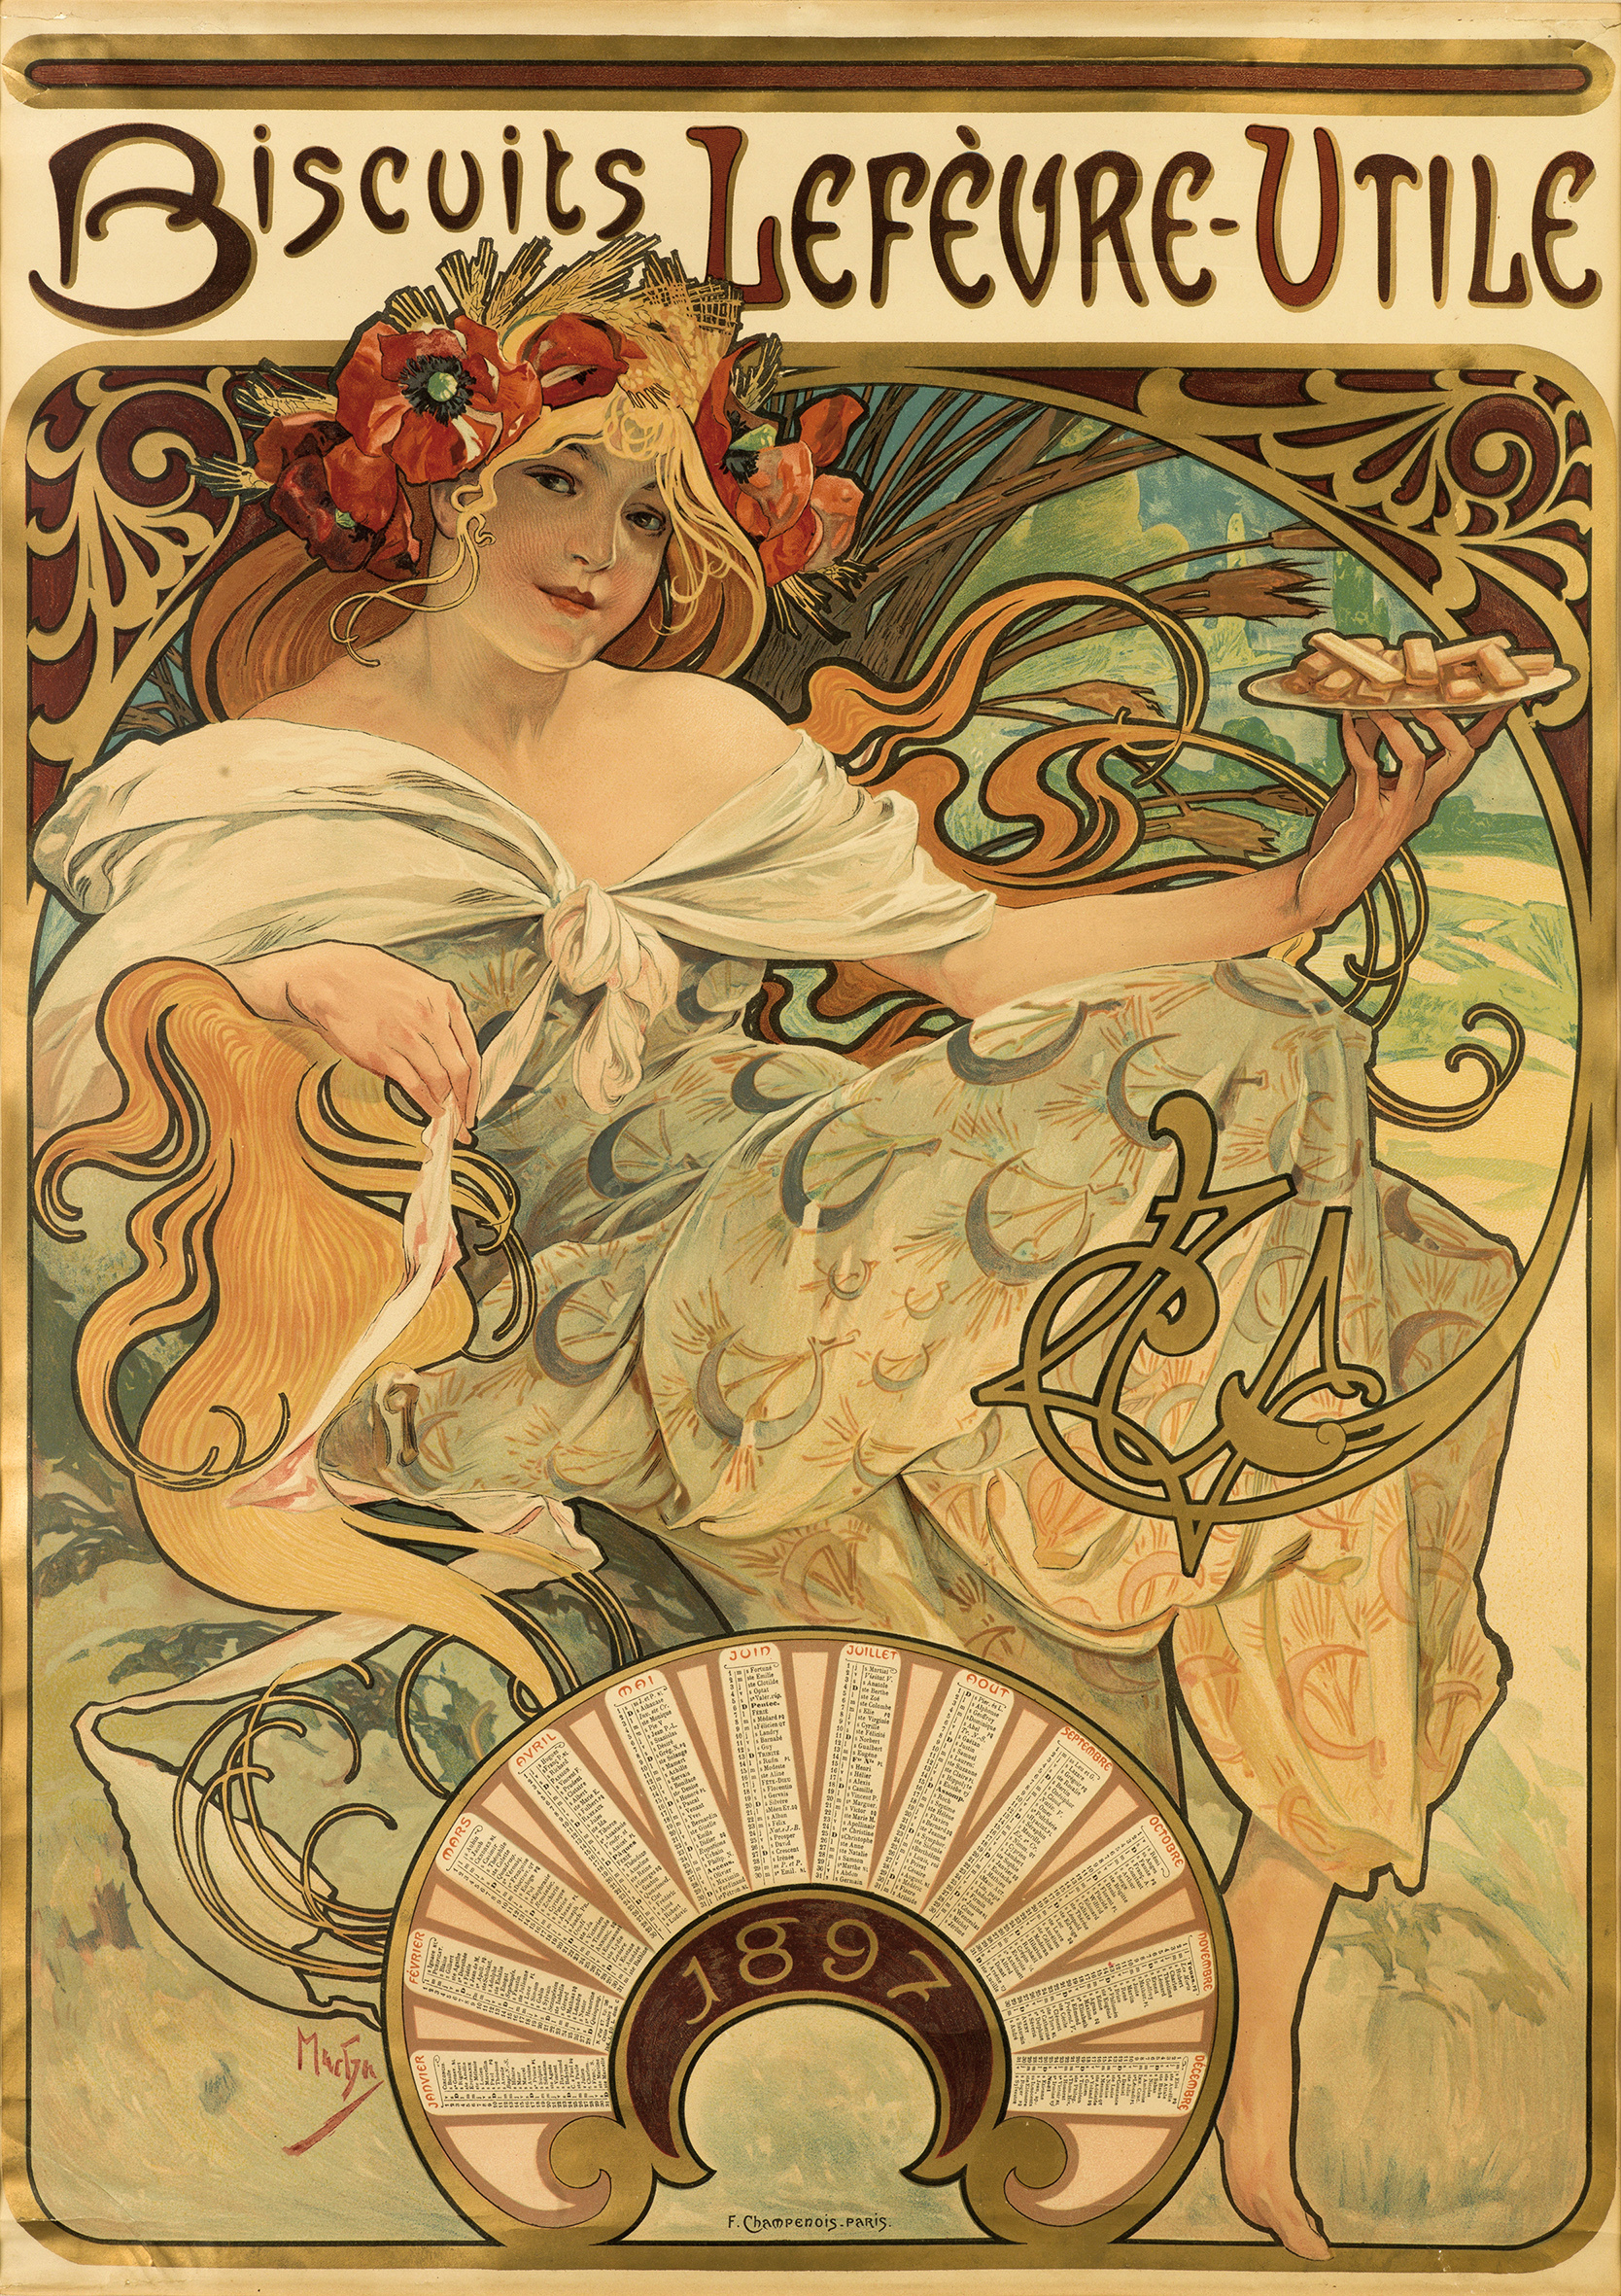 A poster of a female wearing a white dress and a floral headpiece while holding a plate of biscuits.